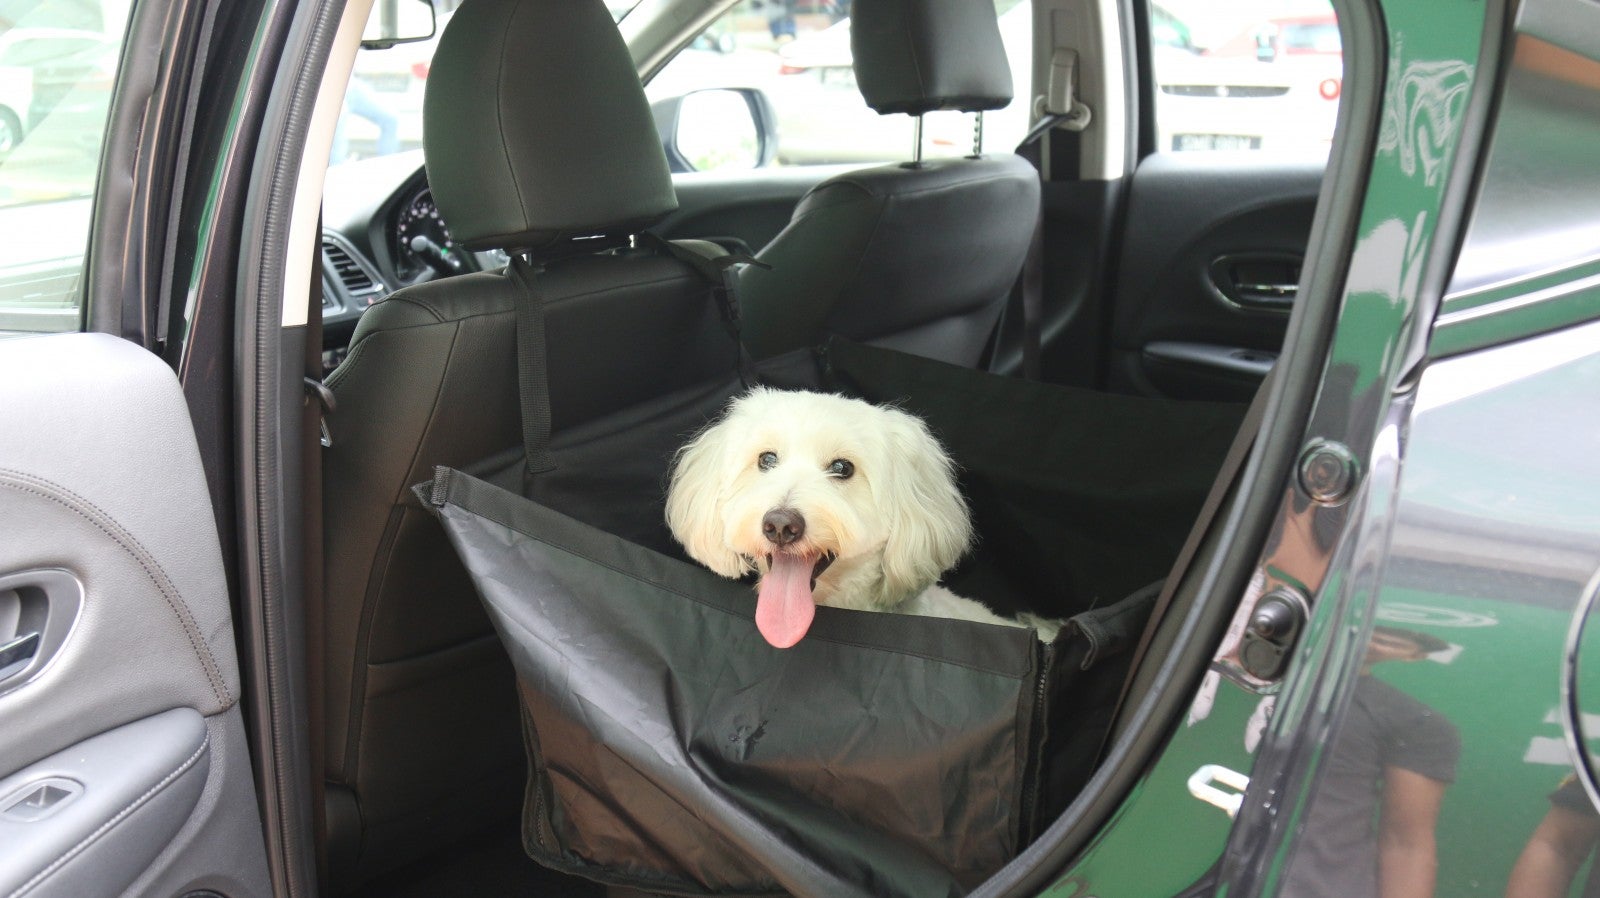 Grab Singapore Now Debuts GrabPet So You Can Travel With Your Four-legged Buddies! - WORLD OF BUZZ 7